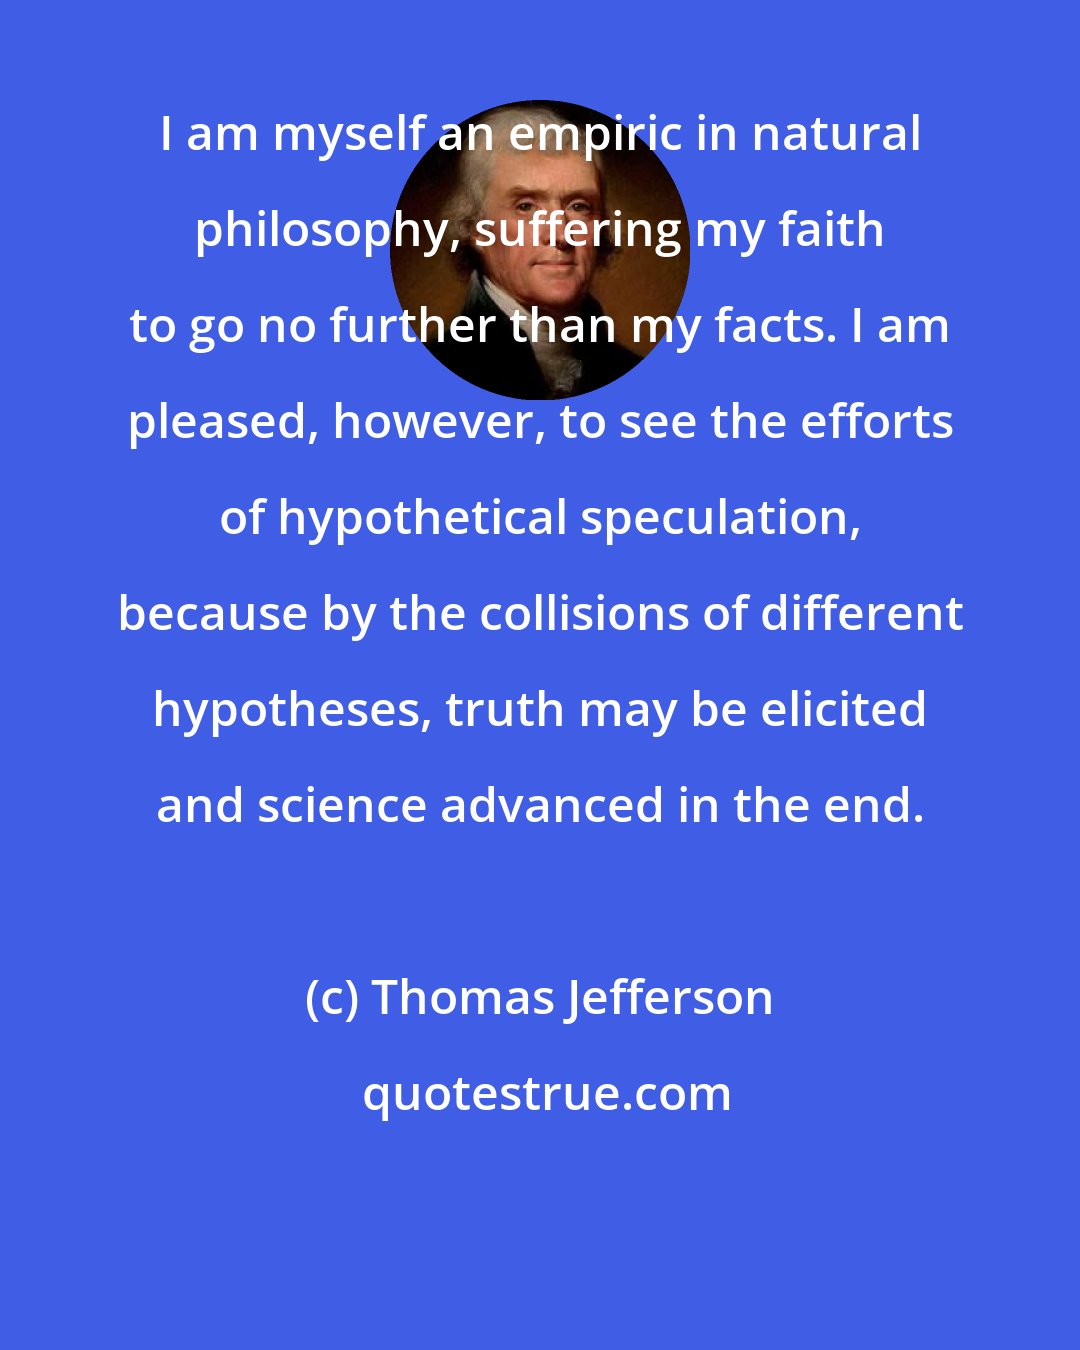 Thomas Jefferson: I am myself an empiric in natural philosophy, suffering my faith to go no further than my facts. I am pleased, however, to see the efforts of hypothetical speculation, because by the collisions of different hypotheses, truth may be elicited and science advanced in the end.